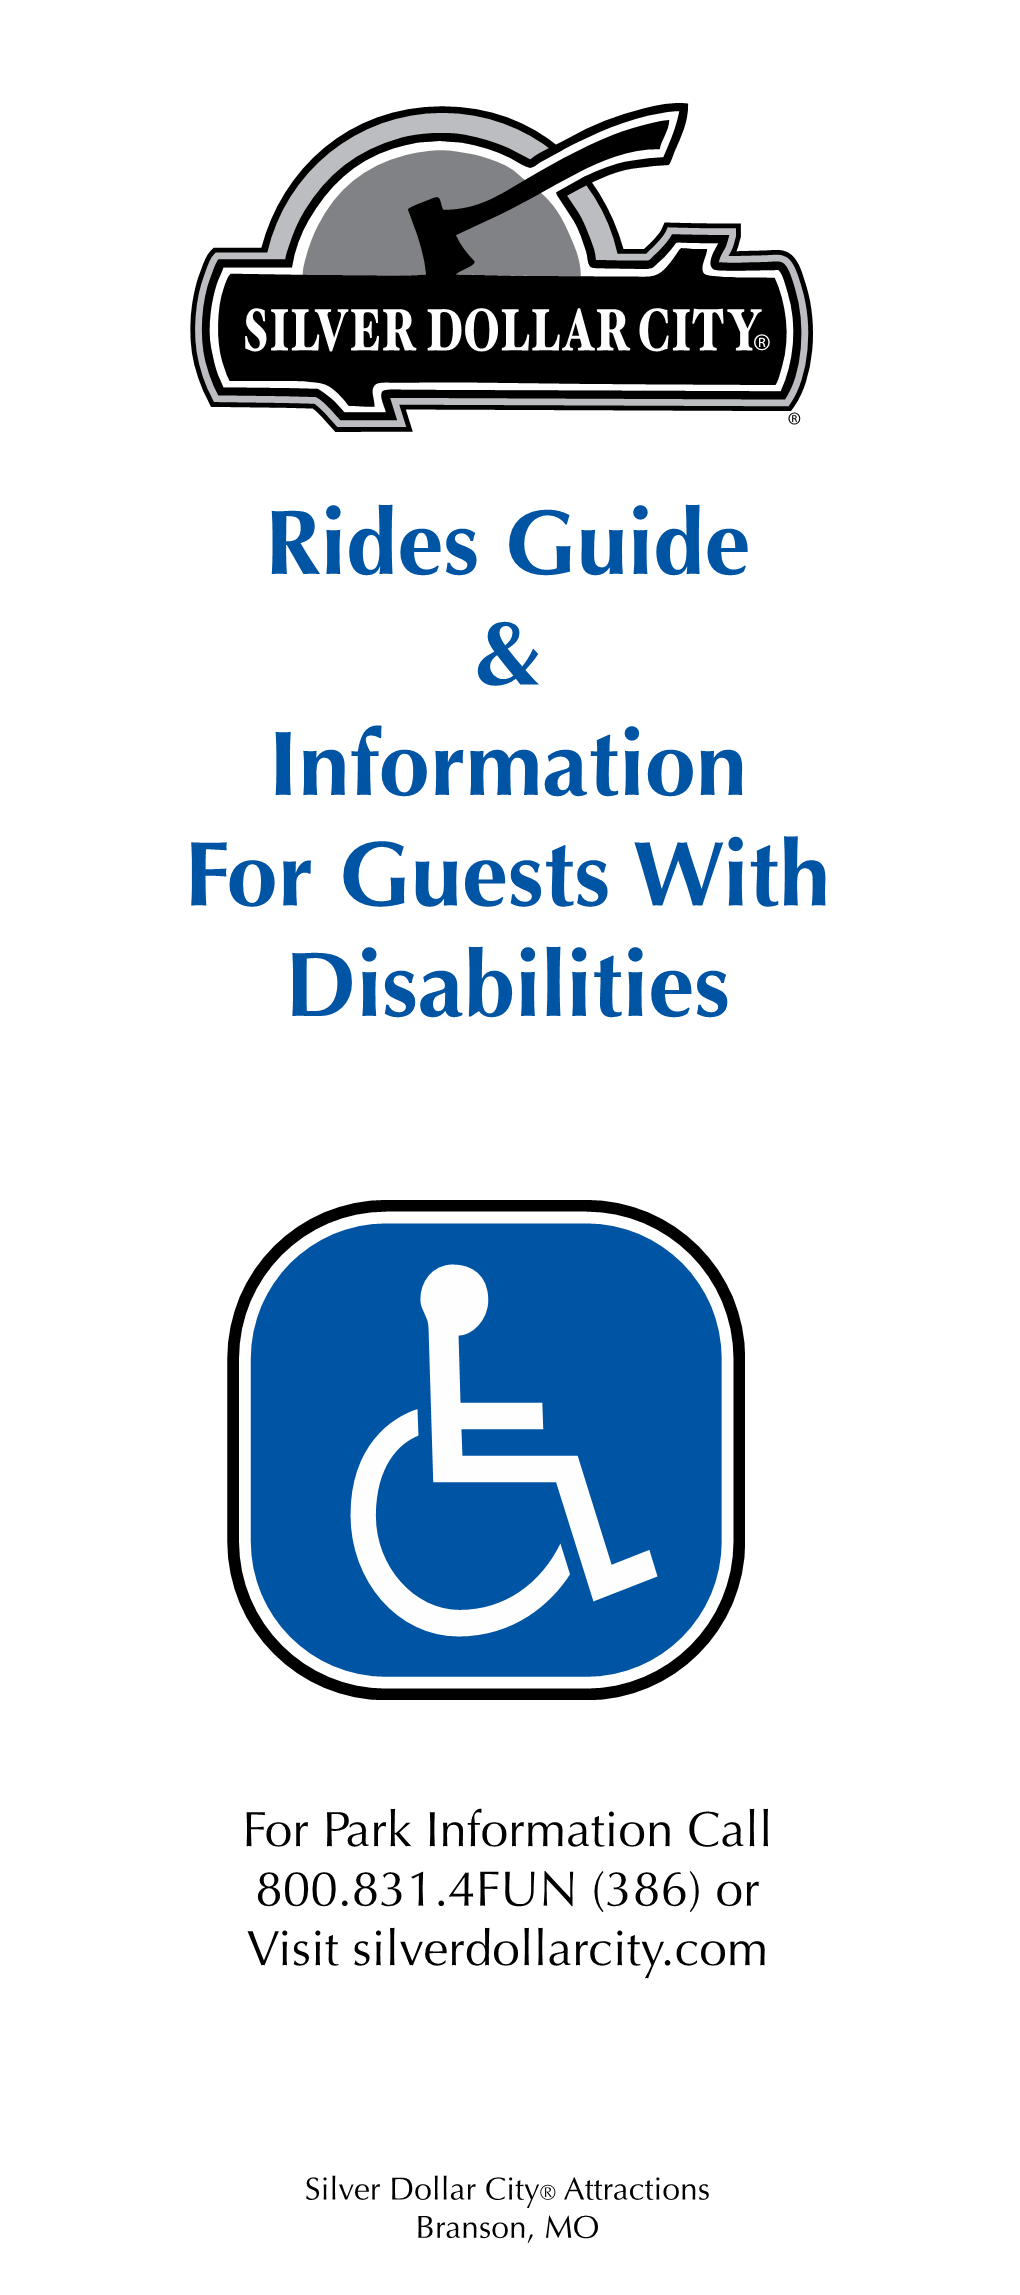 Rides Guide & Information for Guests with Disabilities